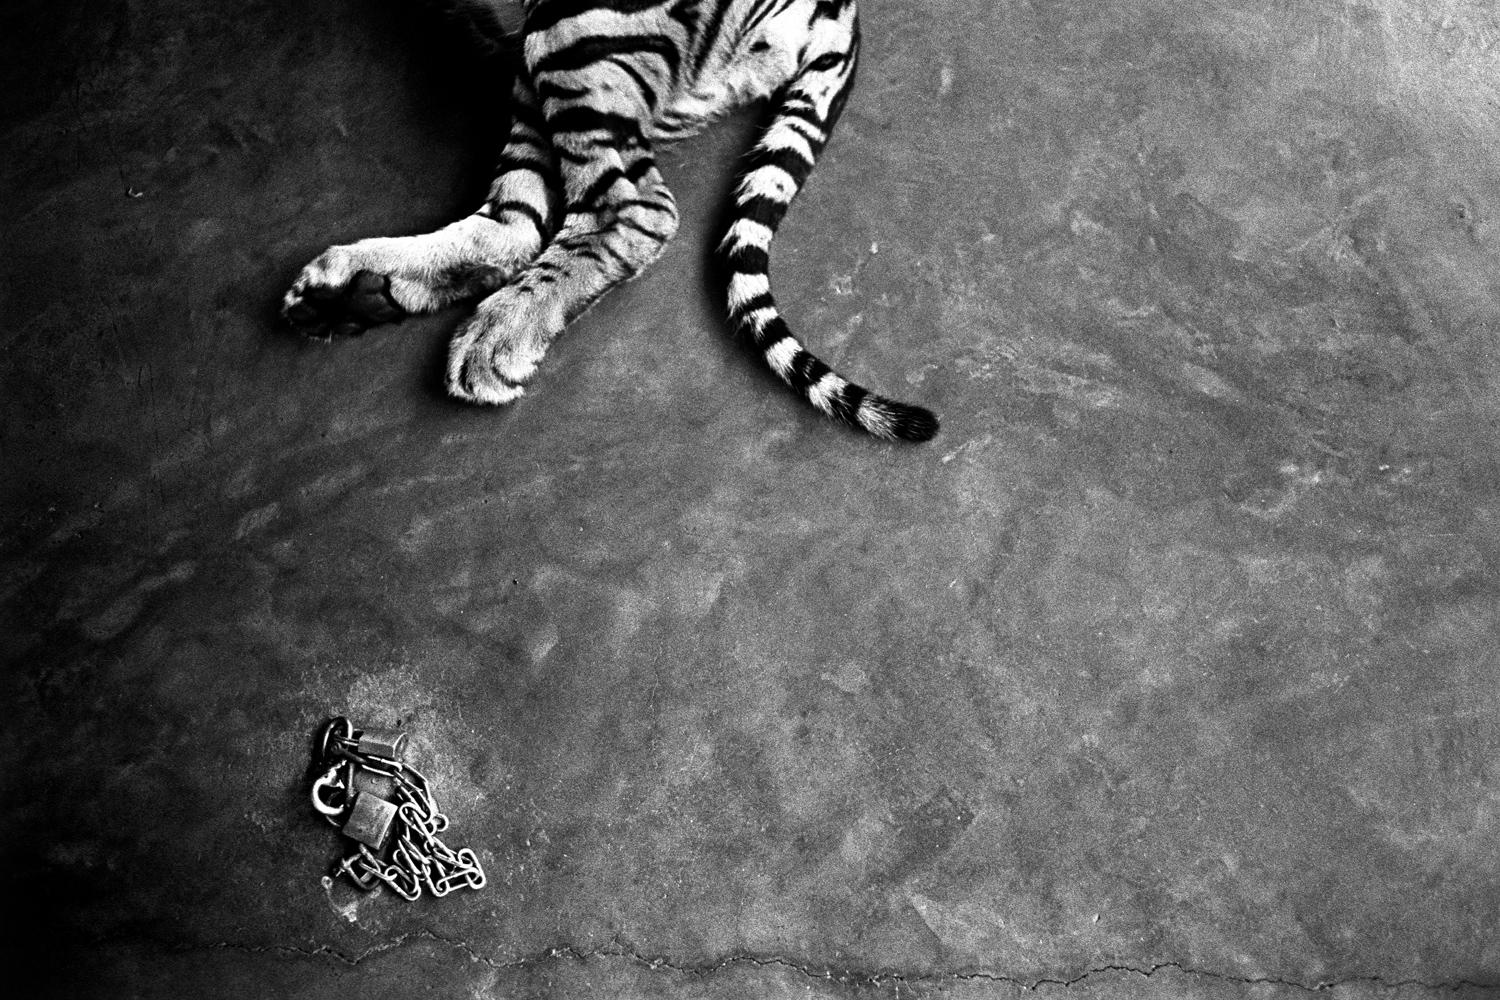 Pattaya, Thailand
                              
                              
                              A young tiger, one of the sideshow attractions for tourists visiting Sriracha Zoo, rests in the midday heat. Visitors can pay to have their photos taken with the animal under the supervision of its handlers.